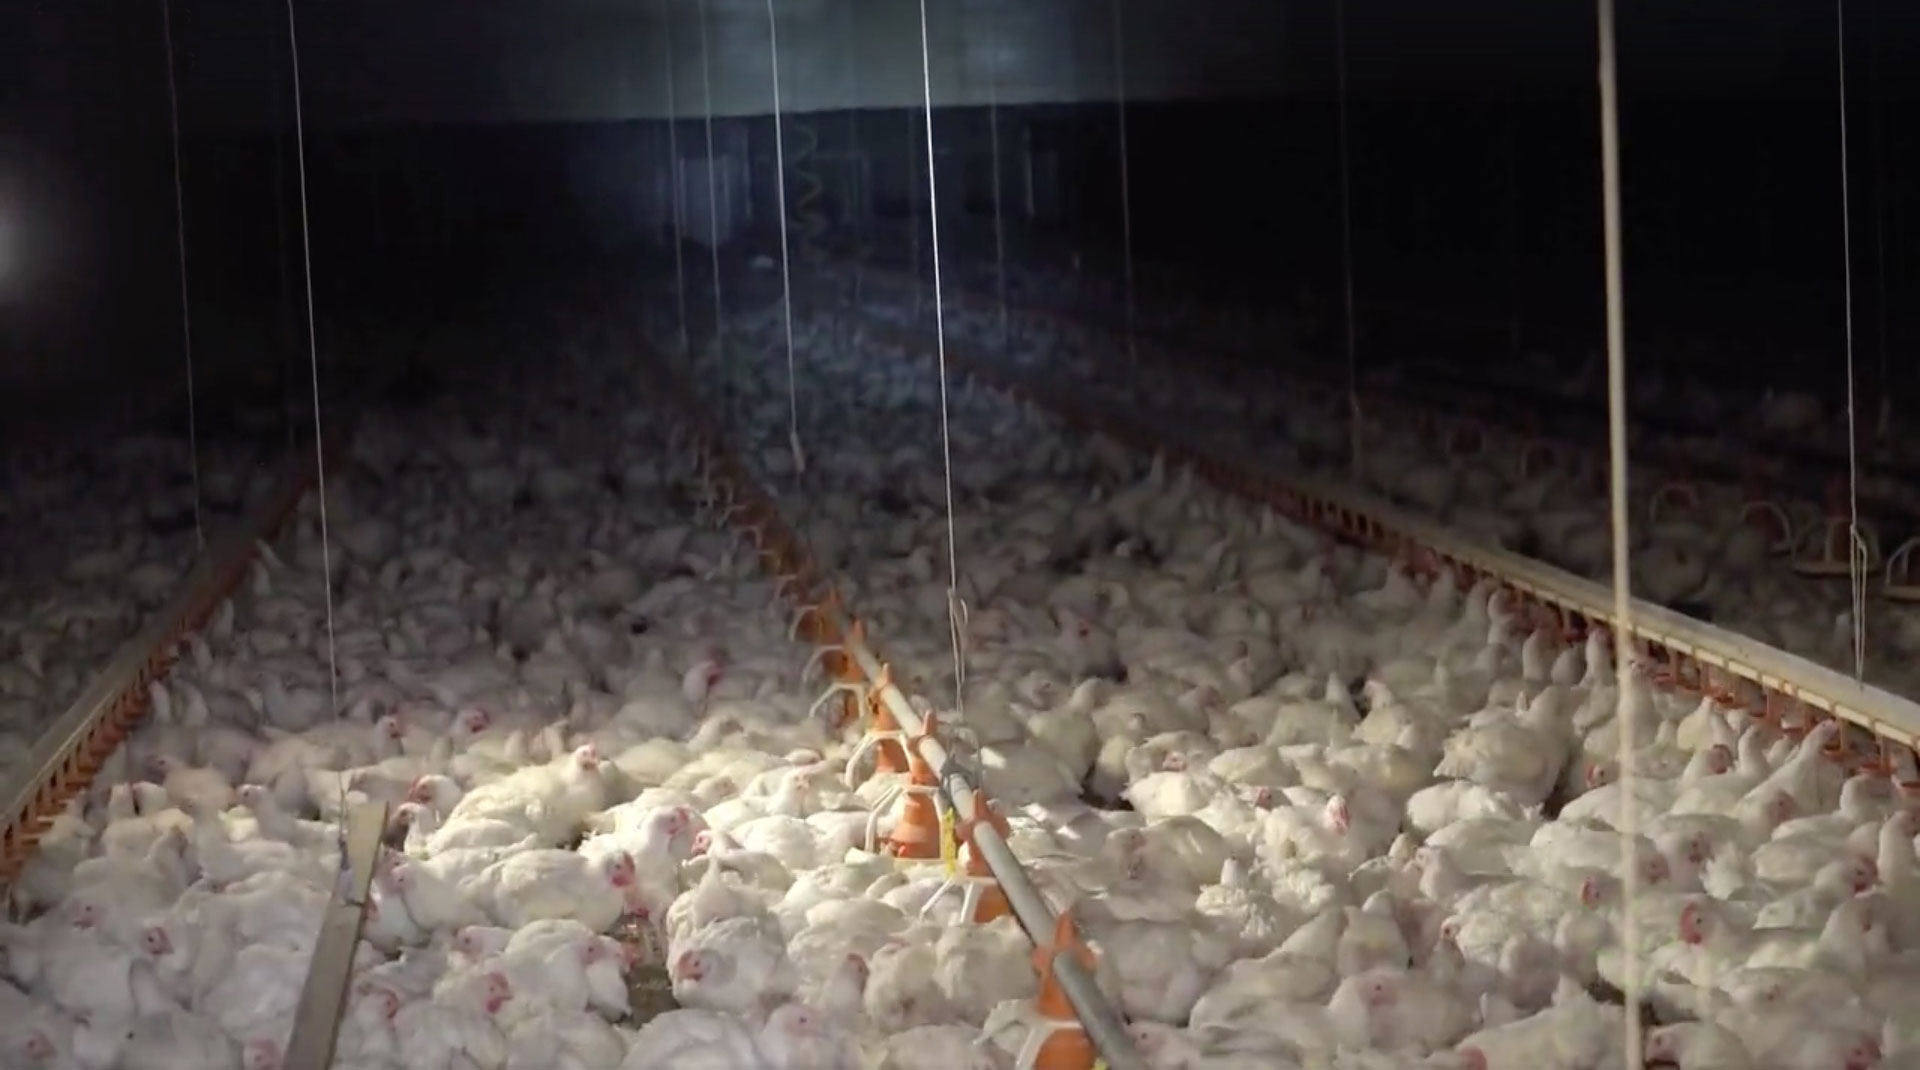 Thousands of hens in a dark shed.